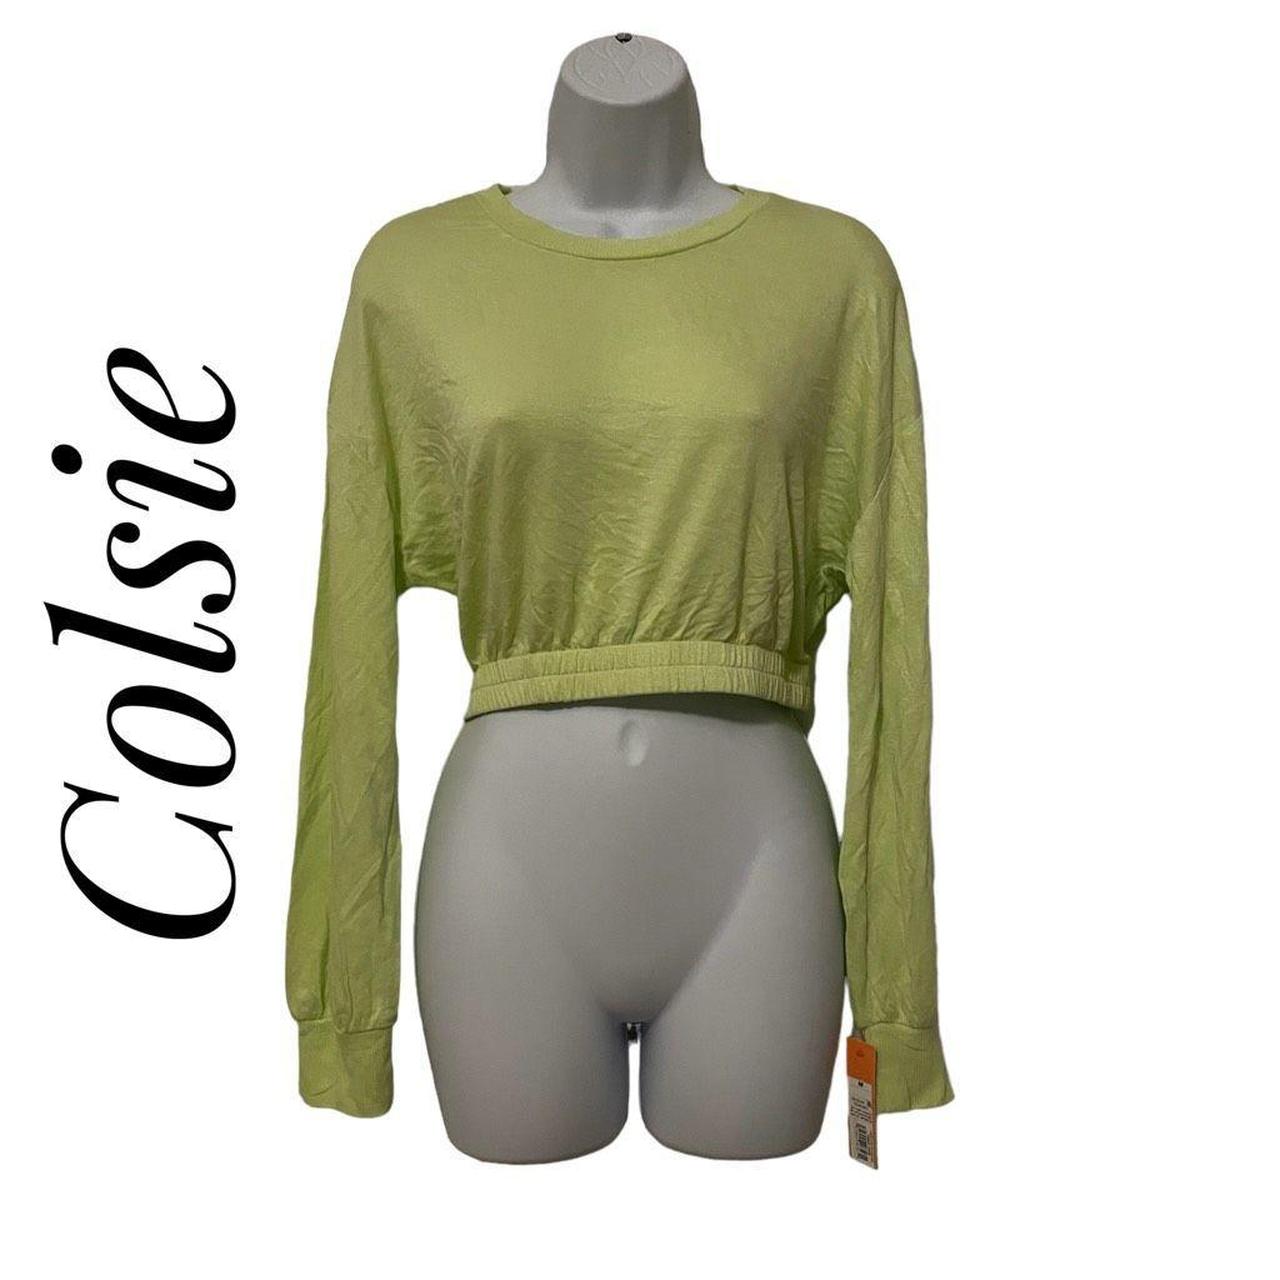 Cropped Sweatshirt Soft Lounger Top by Colsie